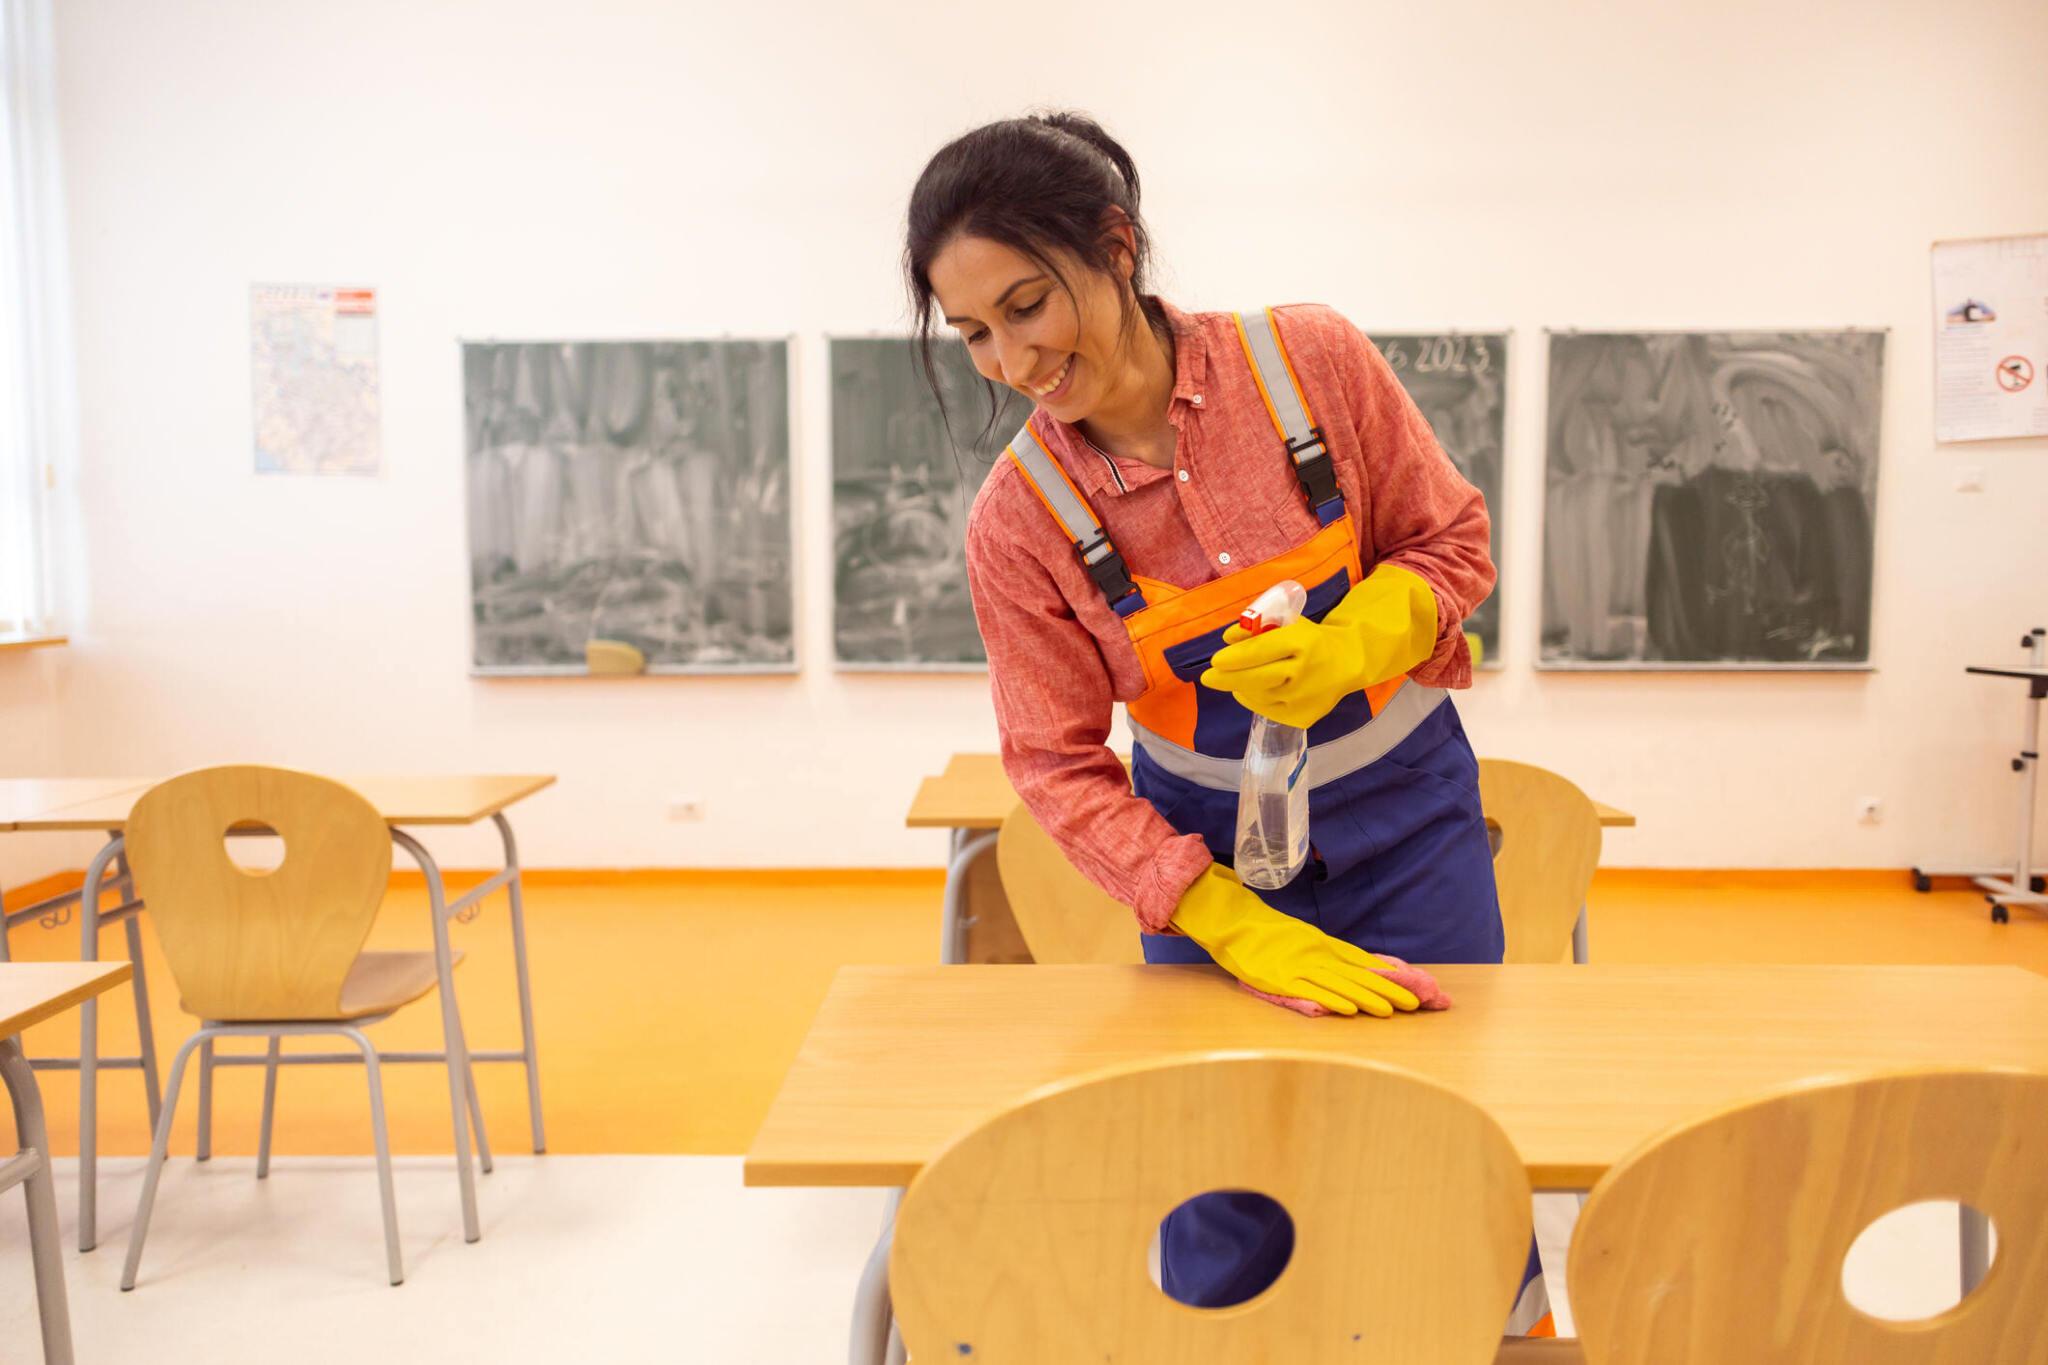 Woman cleaner wiping down table at higher education institution